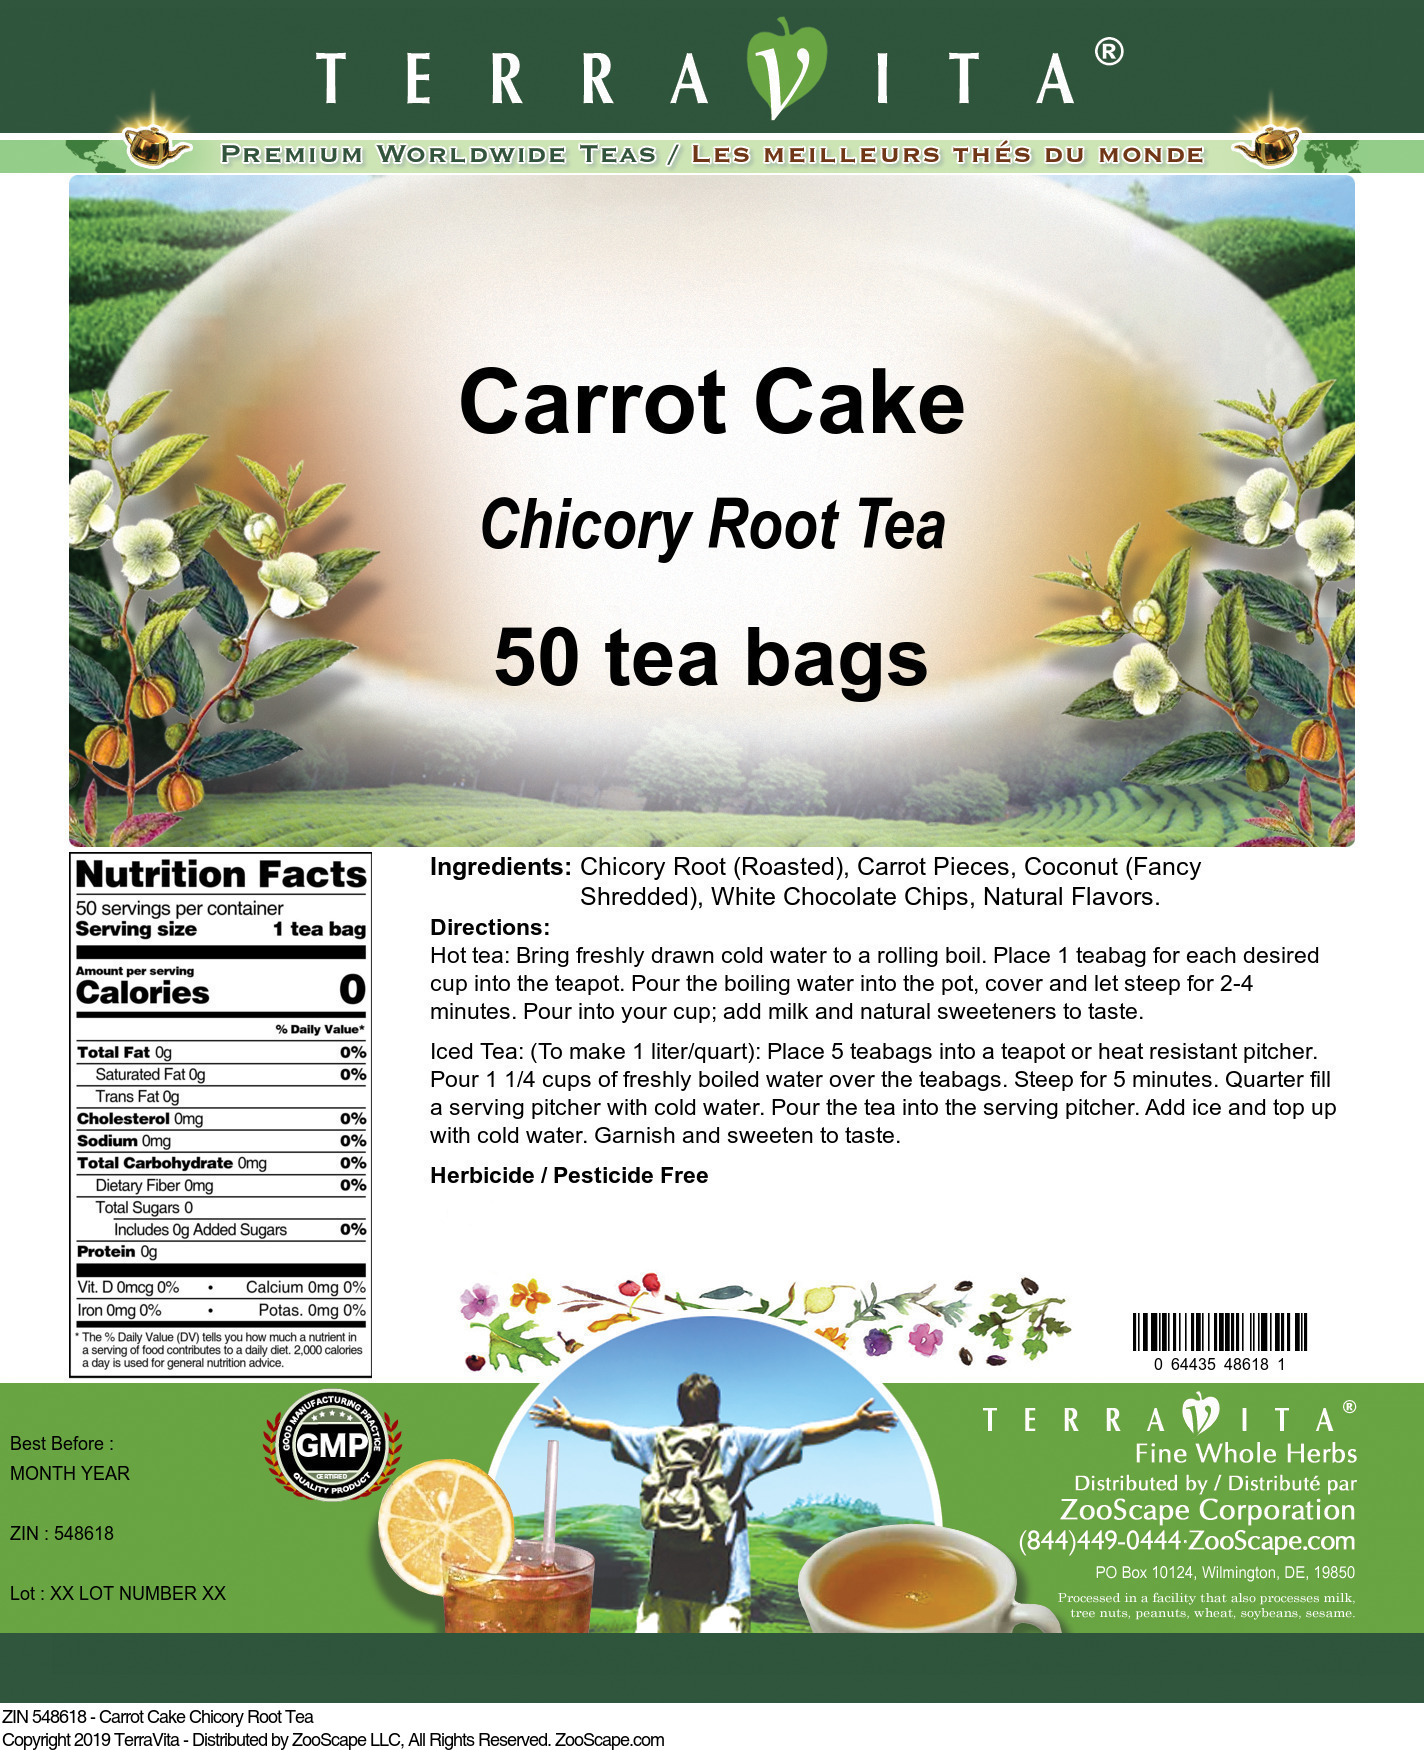 Carrot Cake Chicory Root Tea - Label